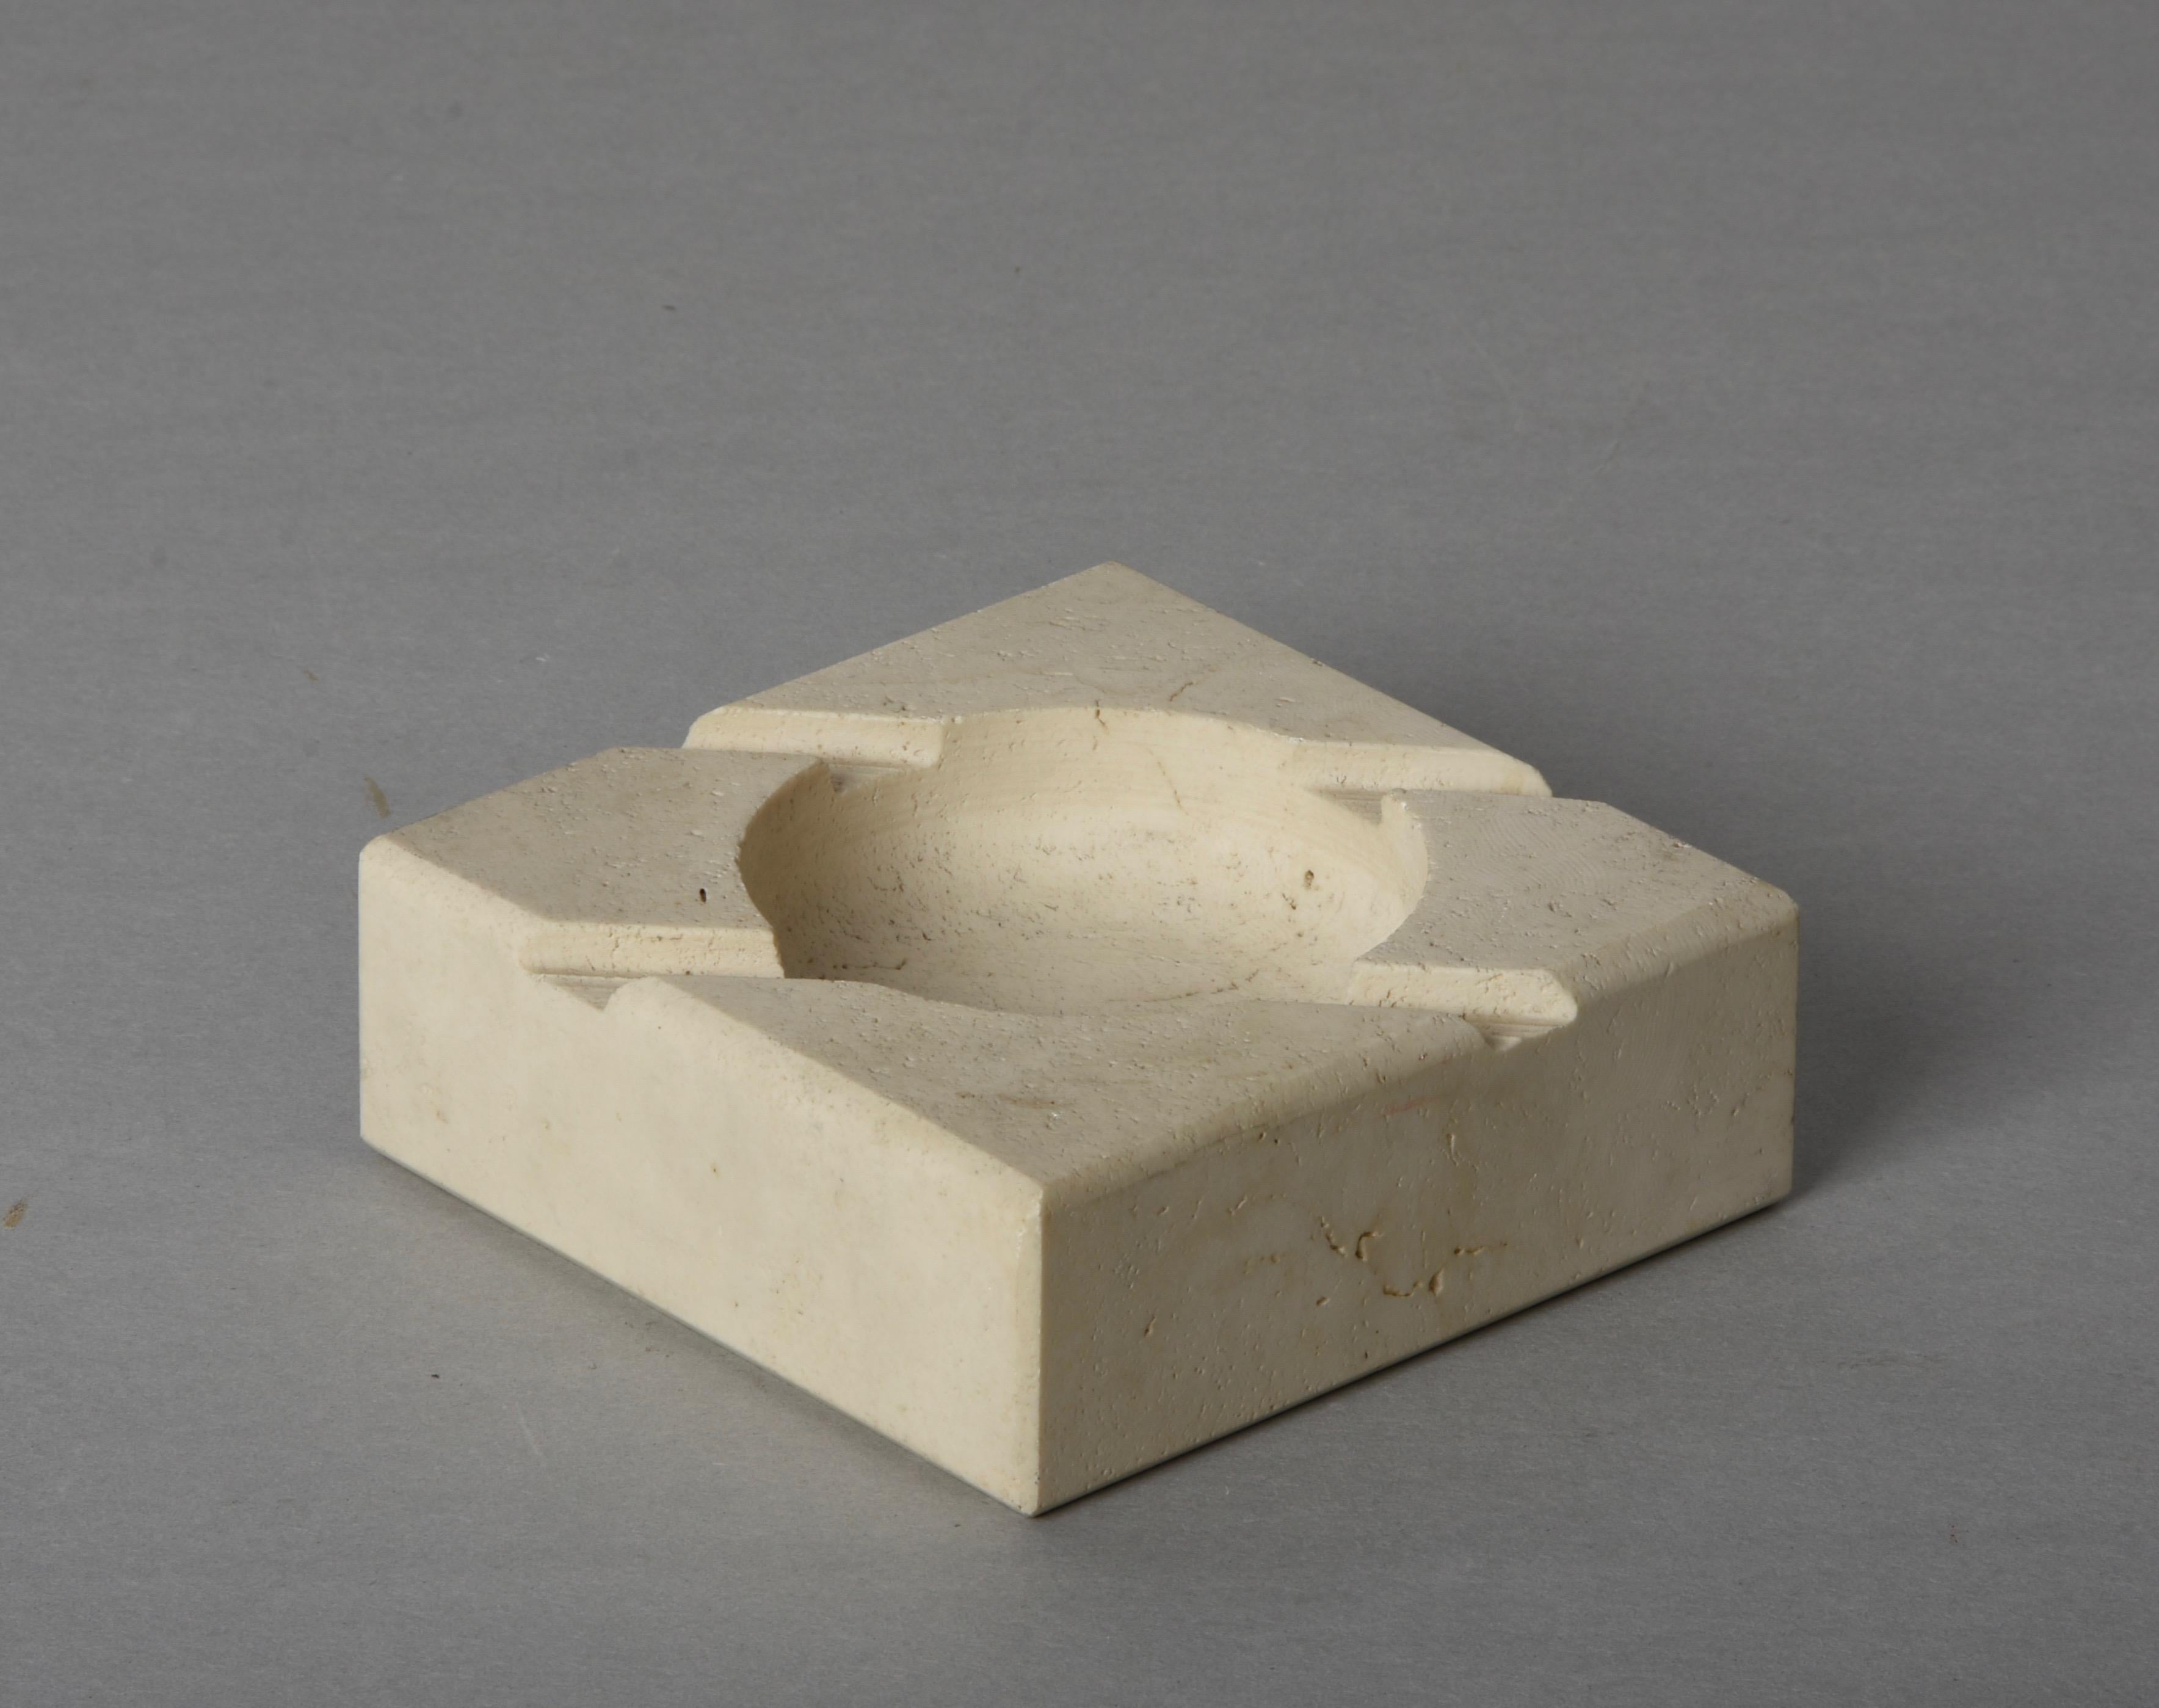 Elegant midcentury squared white travertine marble ashtray. This fantastic piece was designed in Italy during the 1970s after Fratelli Mannelli.

This wonderful item took inspiration from the pieces of this 1970s design duo because of the material